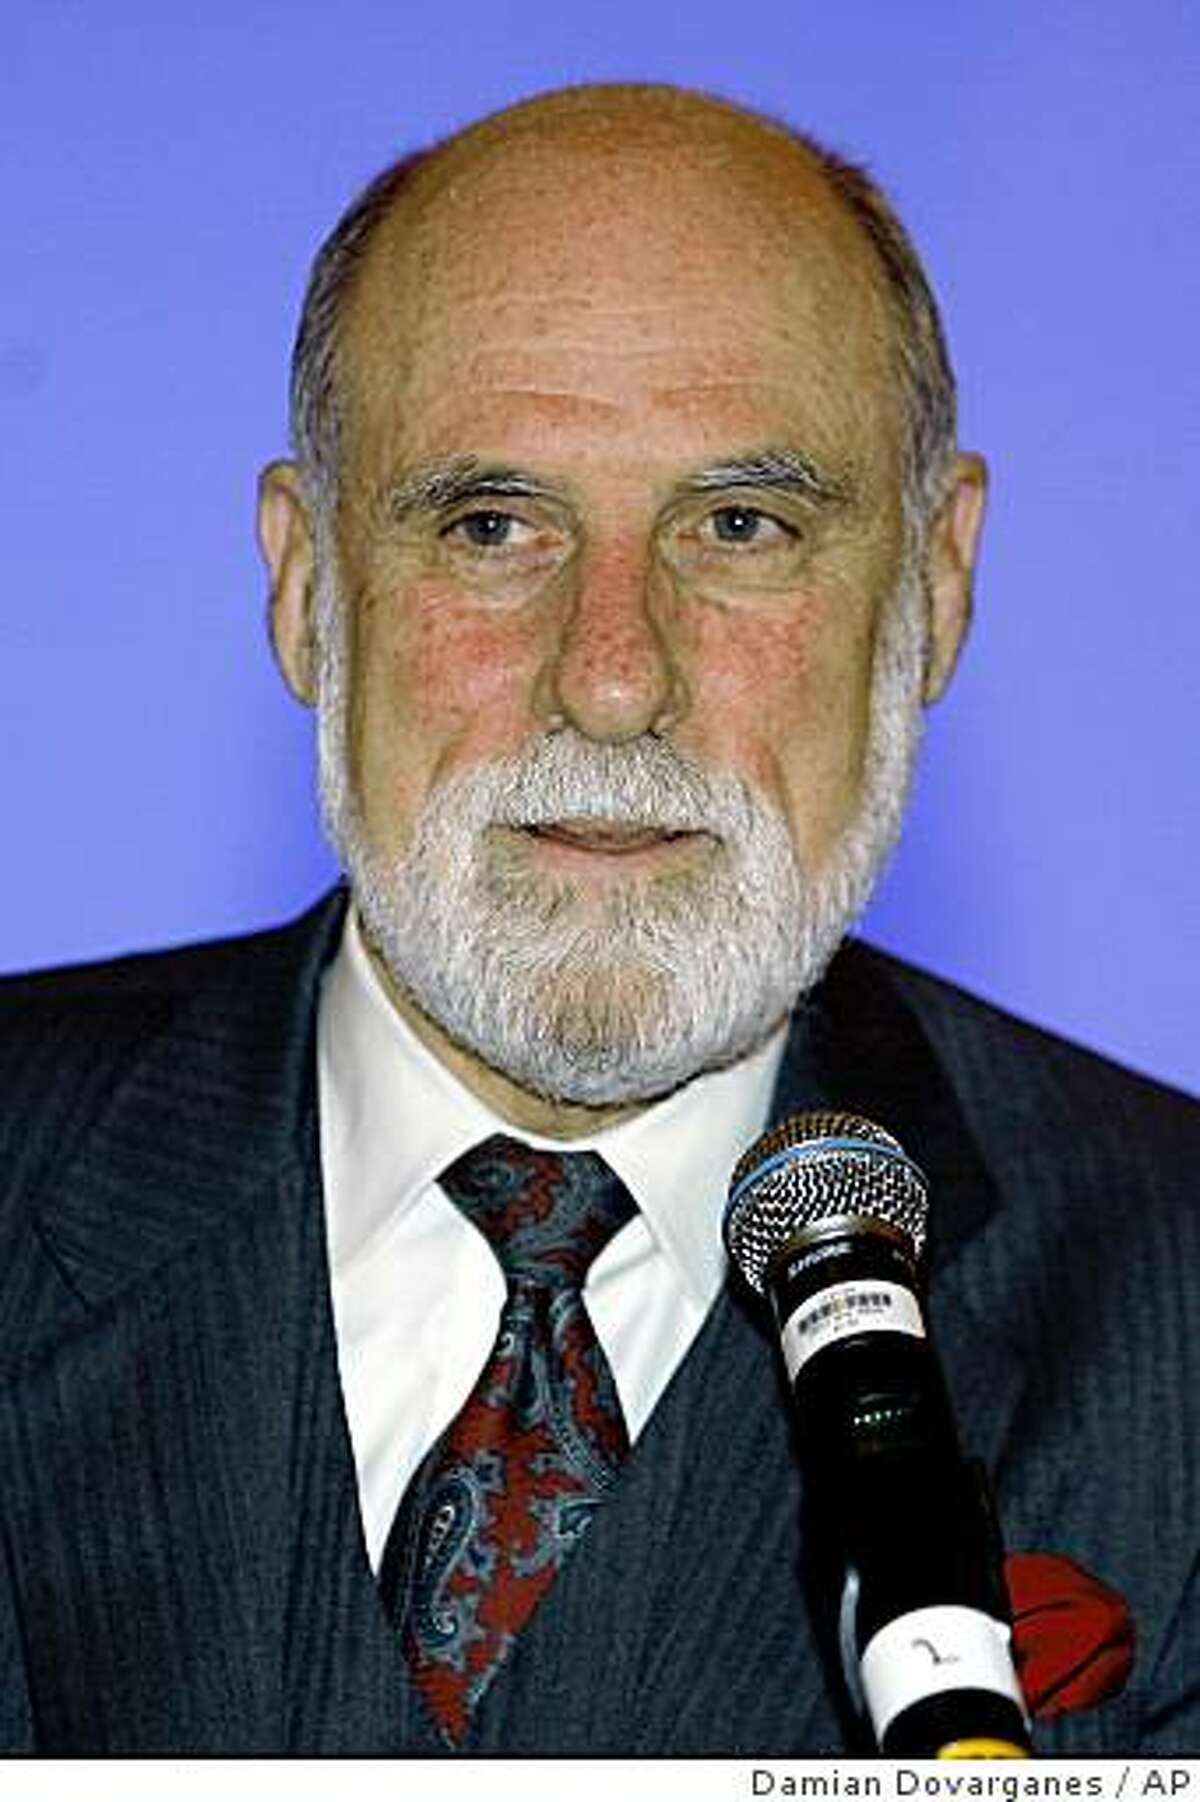 Vinton Cerf has also been mention as a possible chief technology officer